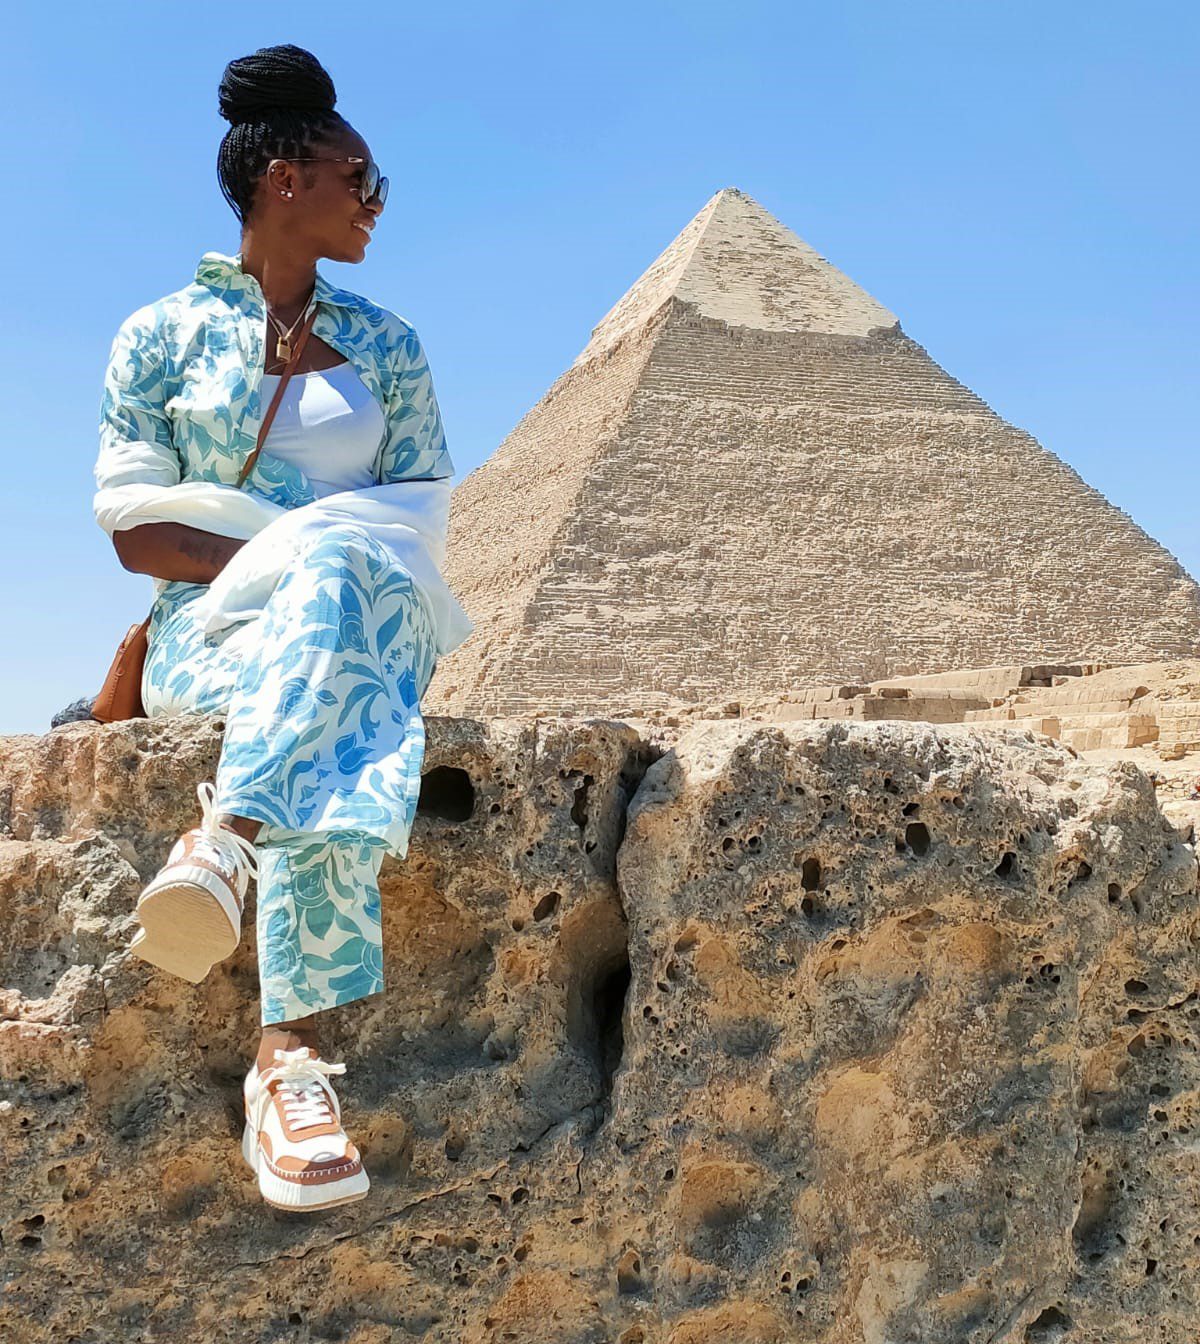 a photo of a tourist who is enjoying a private tour and taking a photo with the Pyramids, Real Egypt Tours